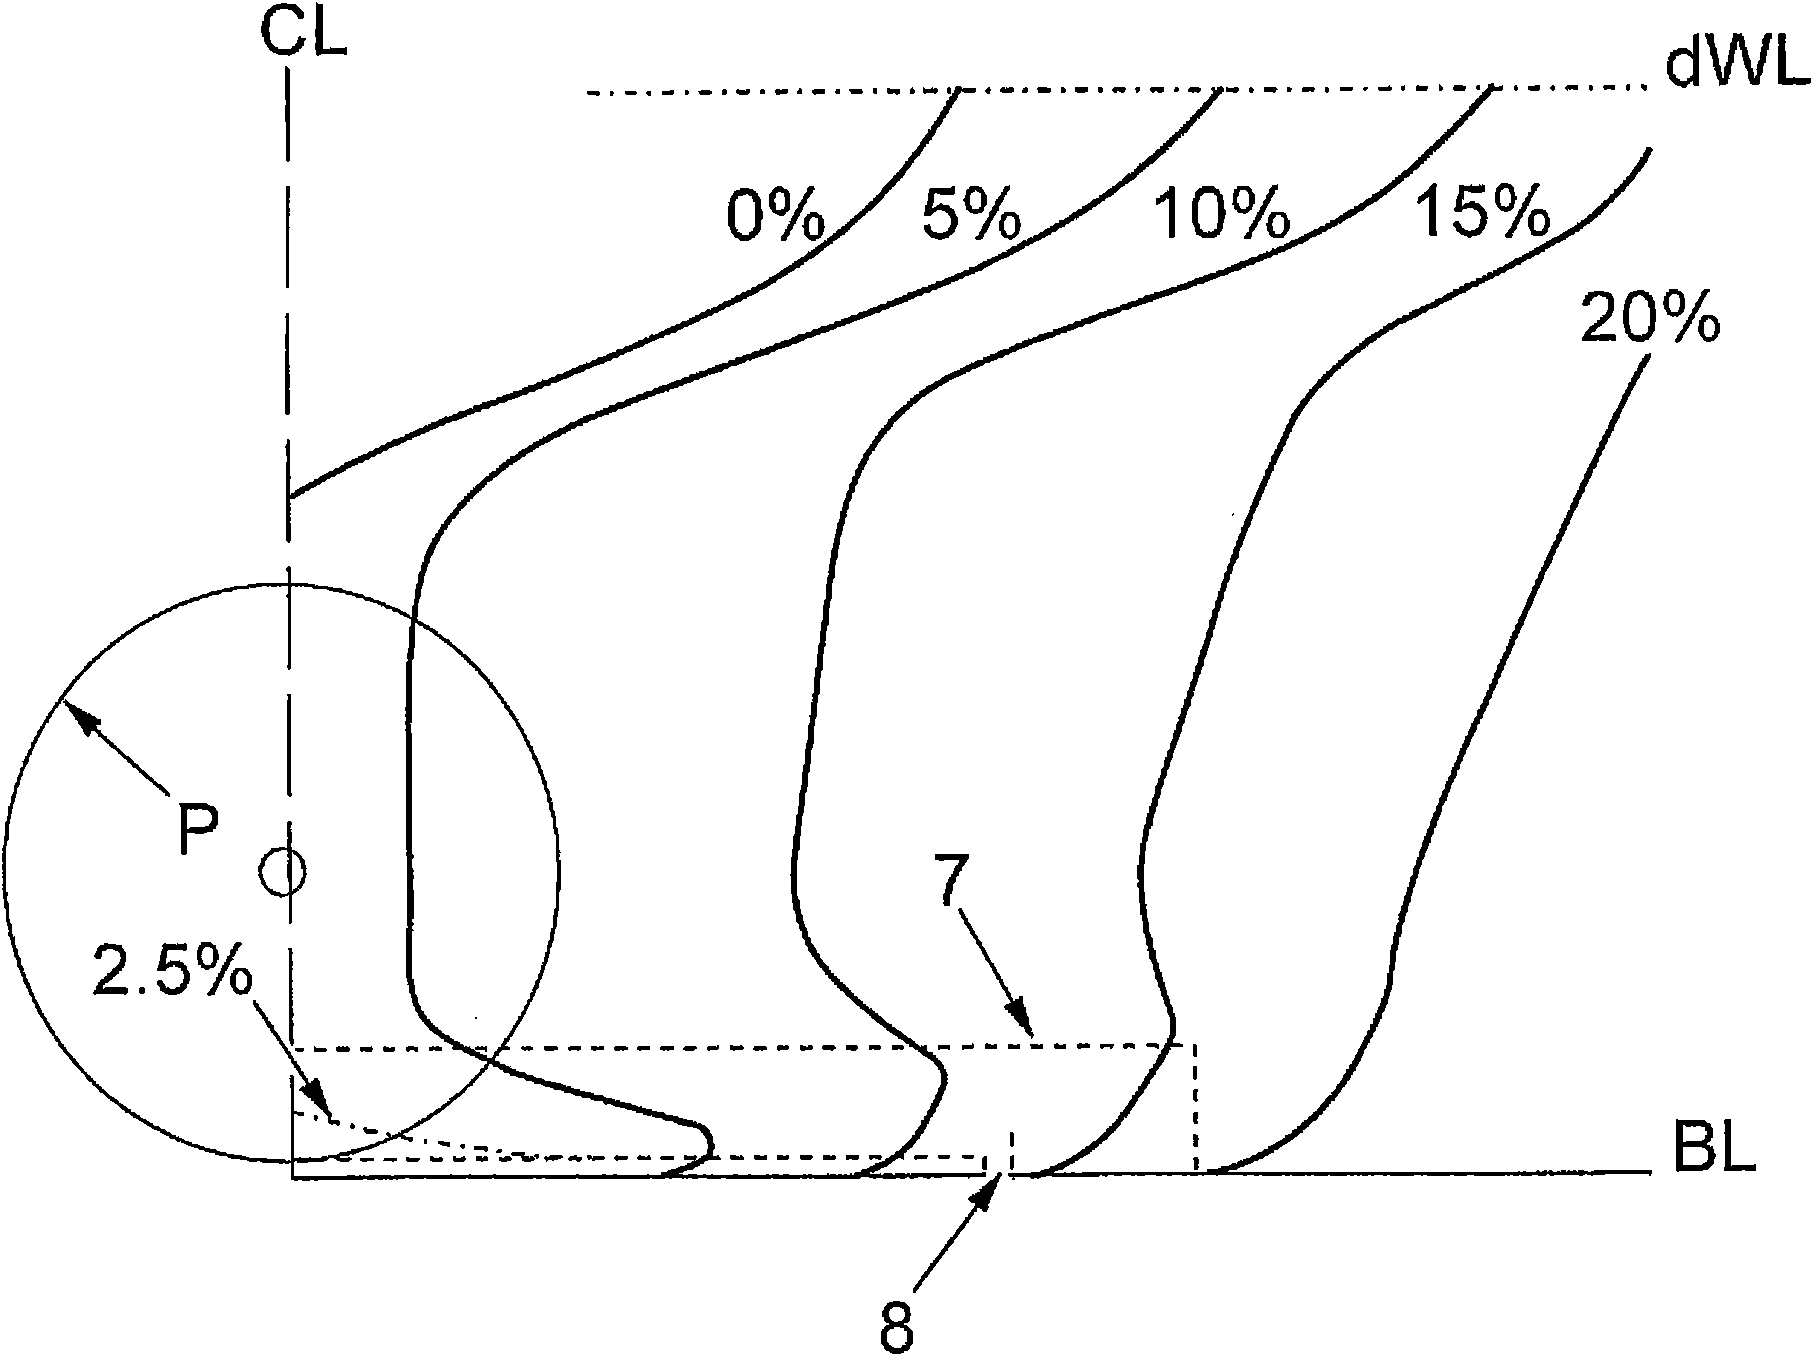 Hull form intended for vessels provided with an air cavity